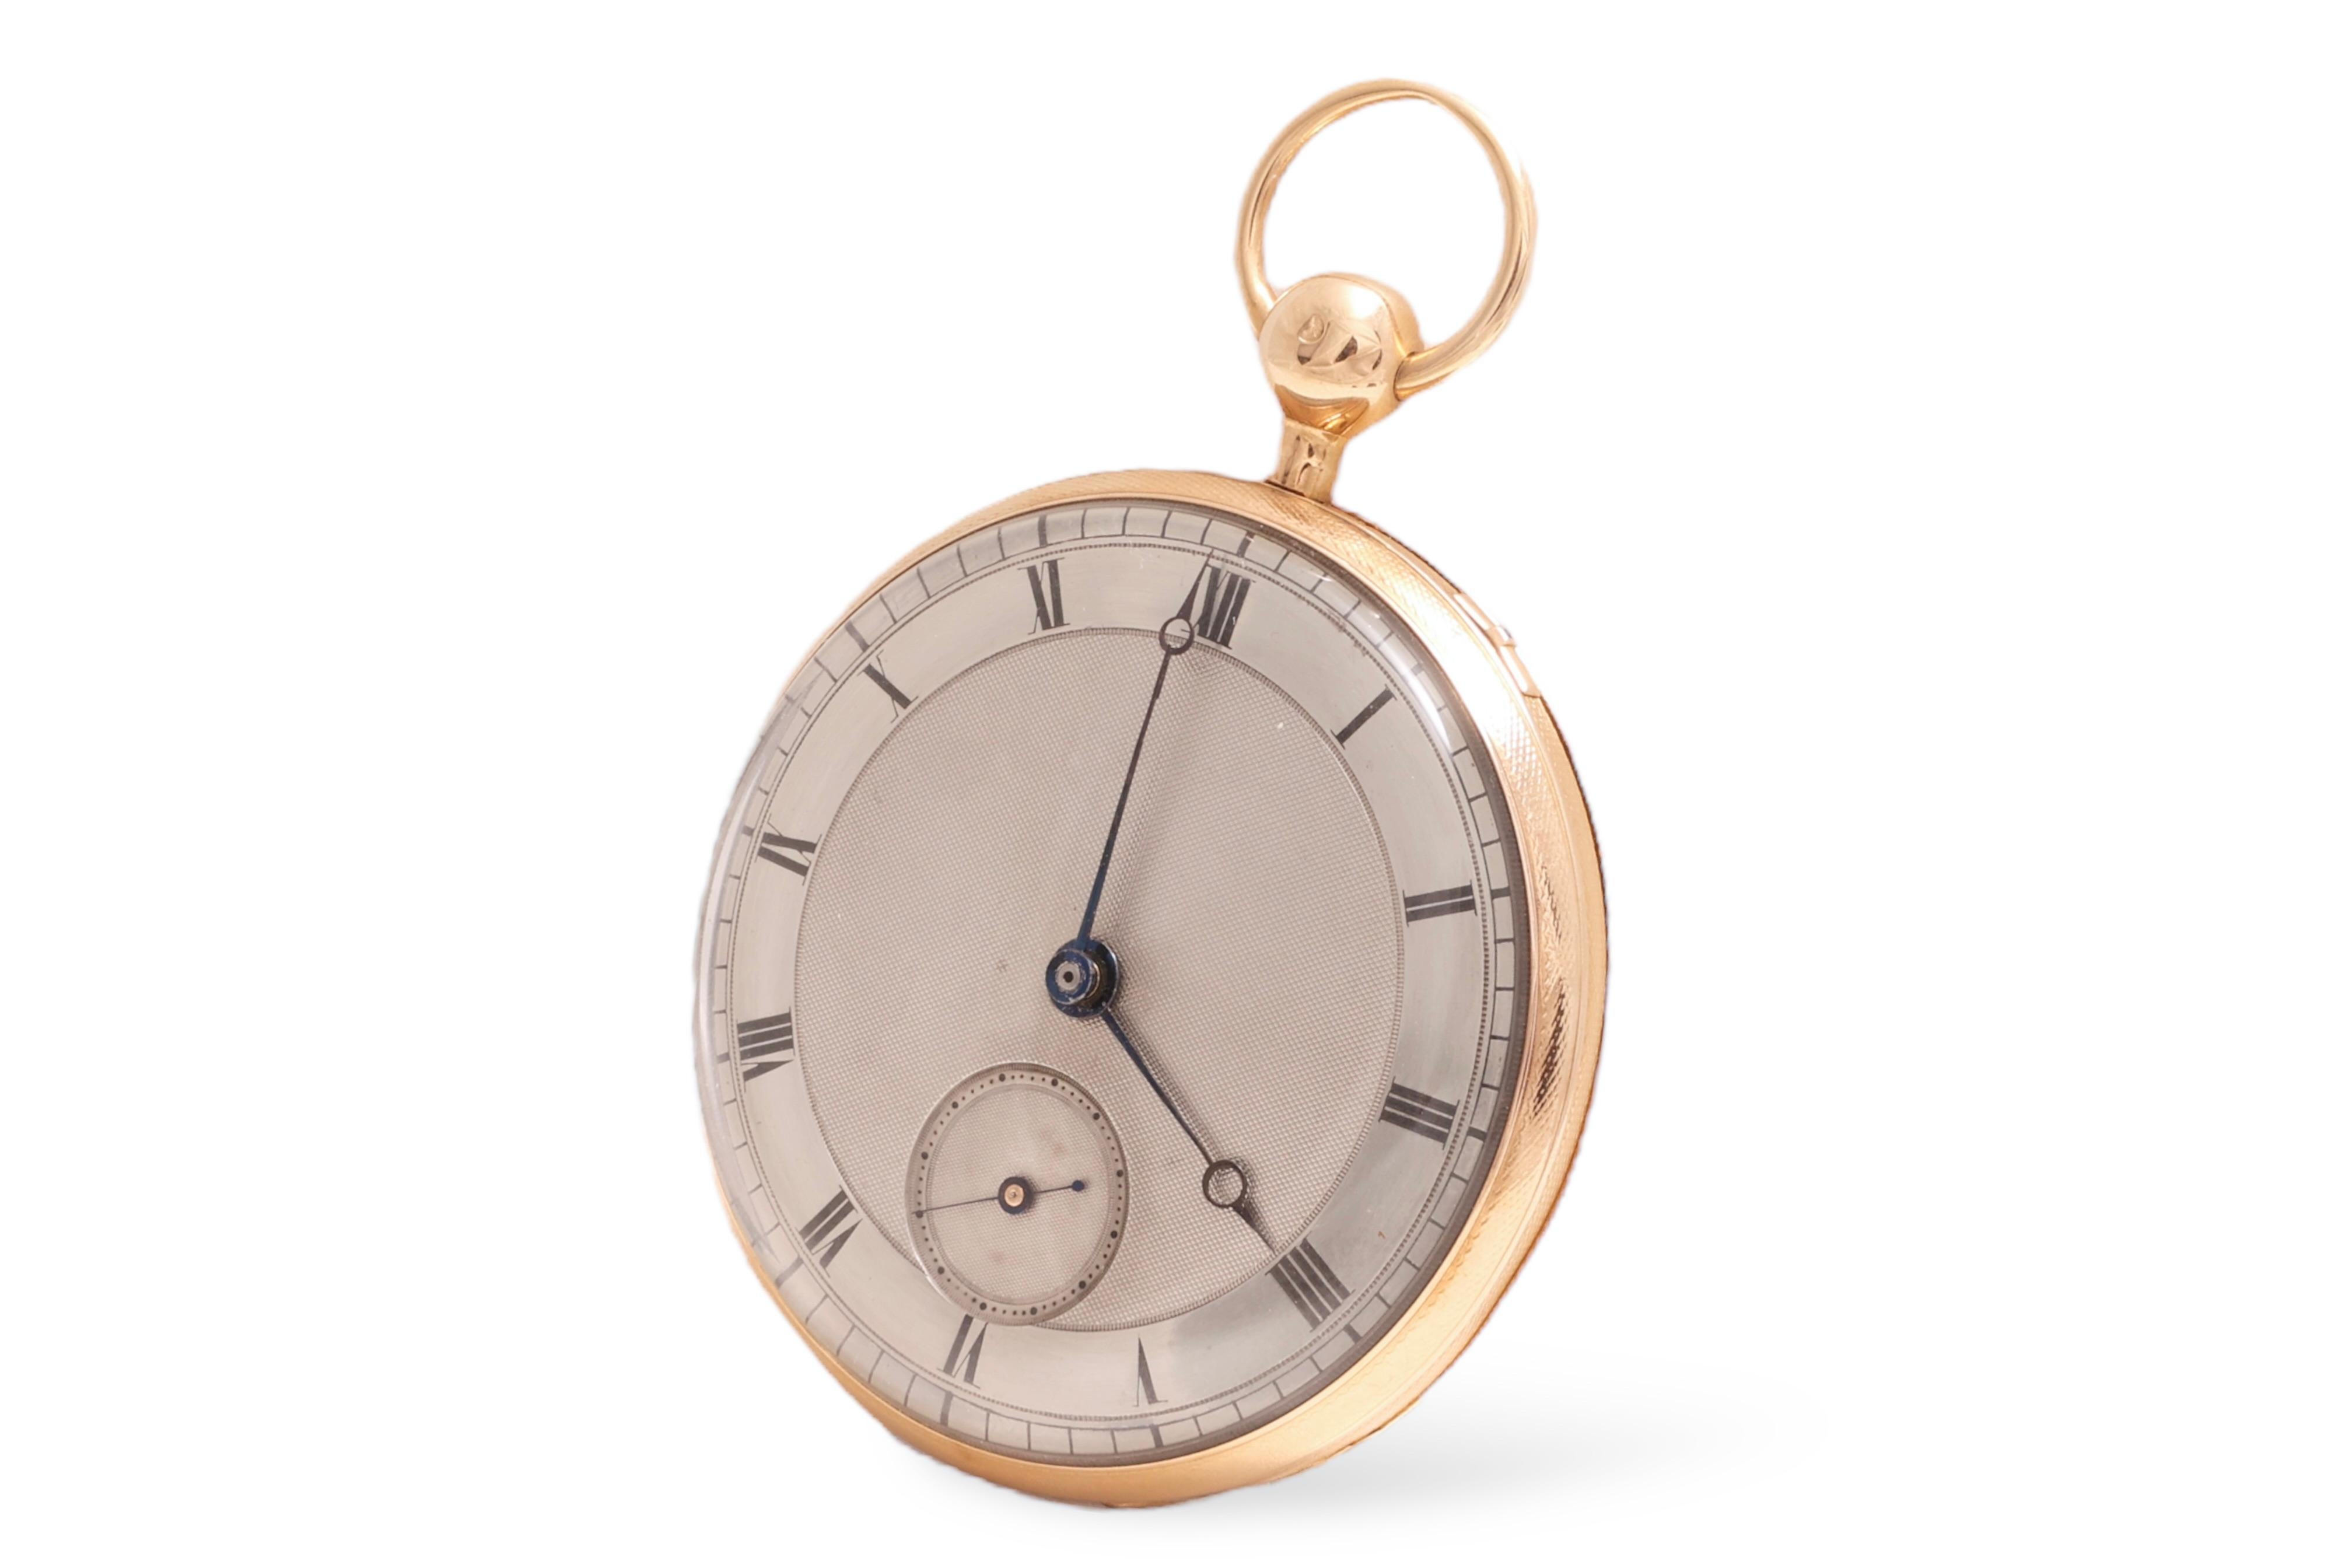 18 kt. Michelez Student of Breguet From Paris Pink Gold Pocket Watch in Nice Working Condition,made by Breguet Student with Quarter Repetition

Movement: mechanical winding with a key, Quarter Repeater with block Function

Indicators: subsidiary